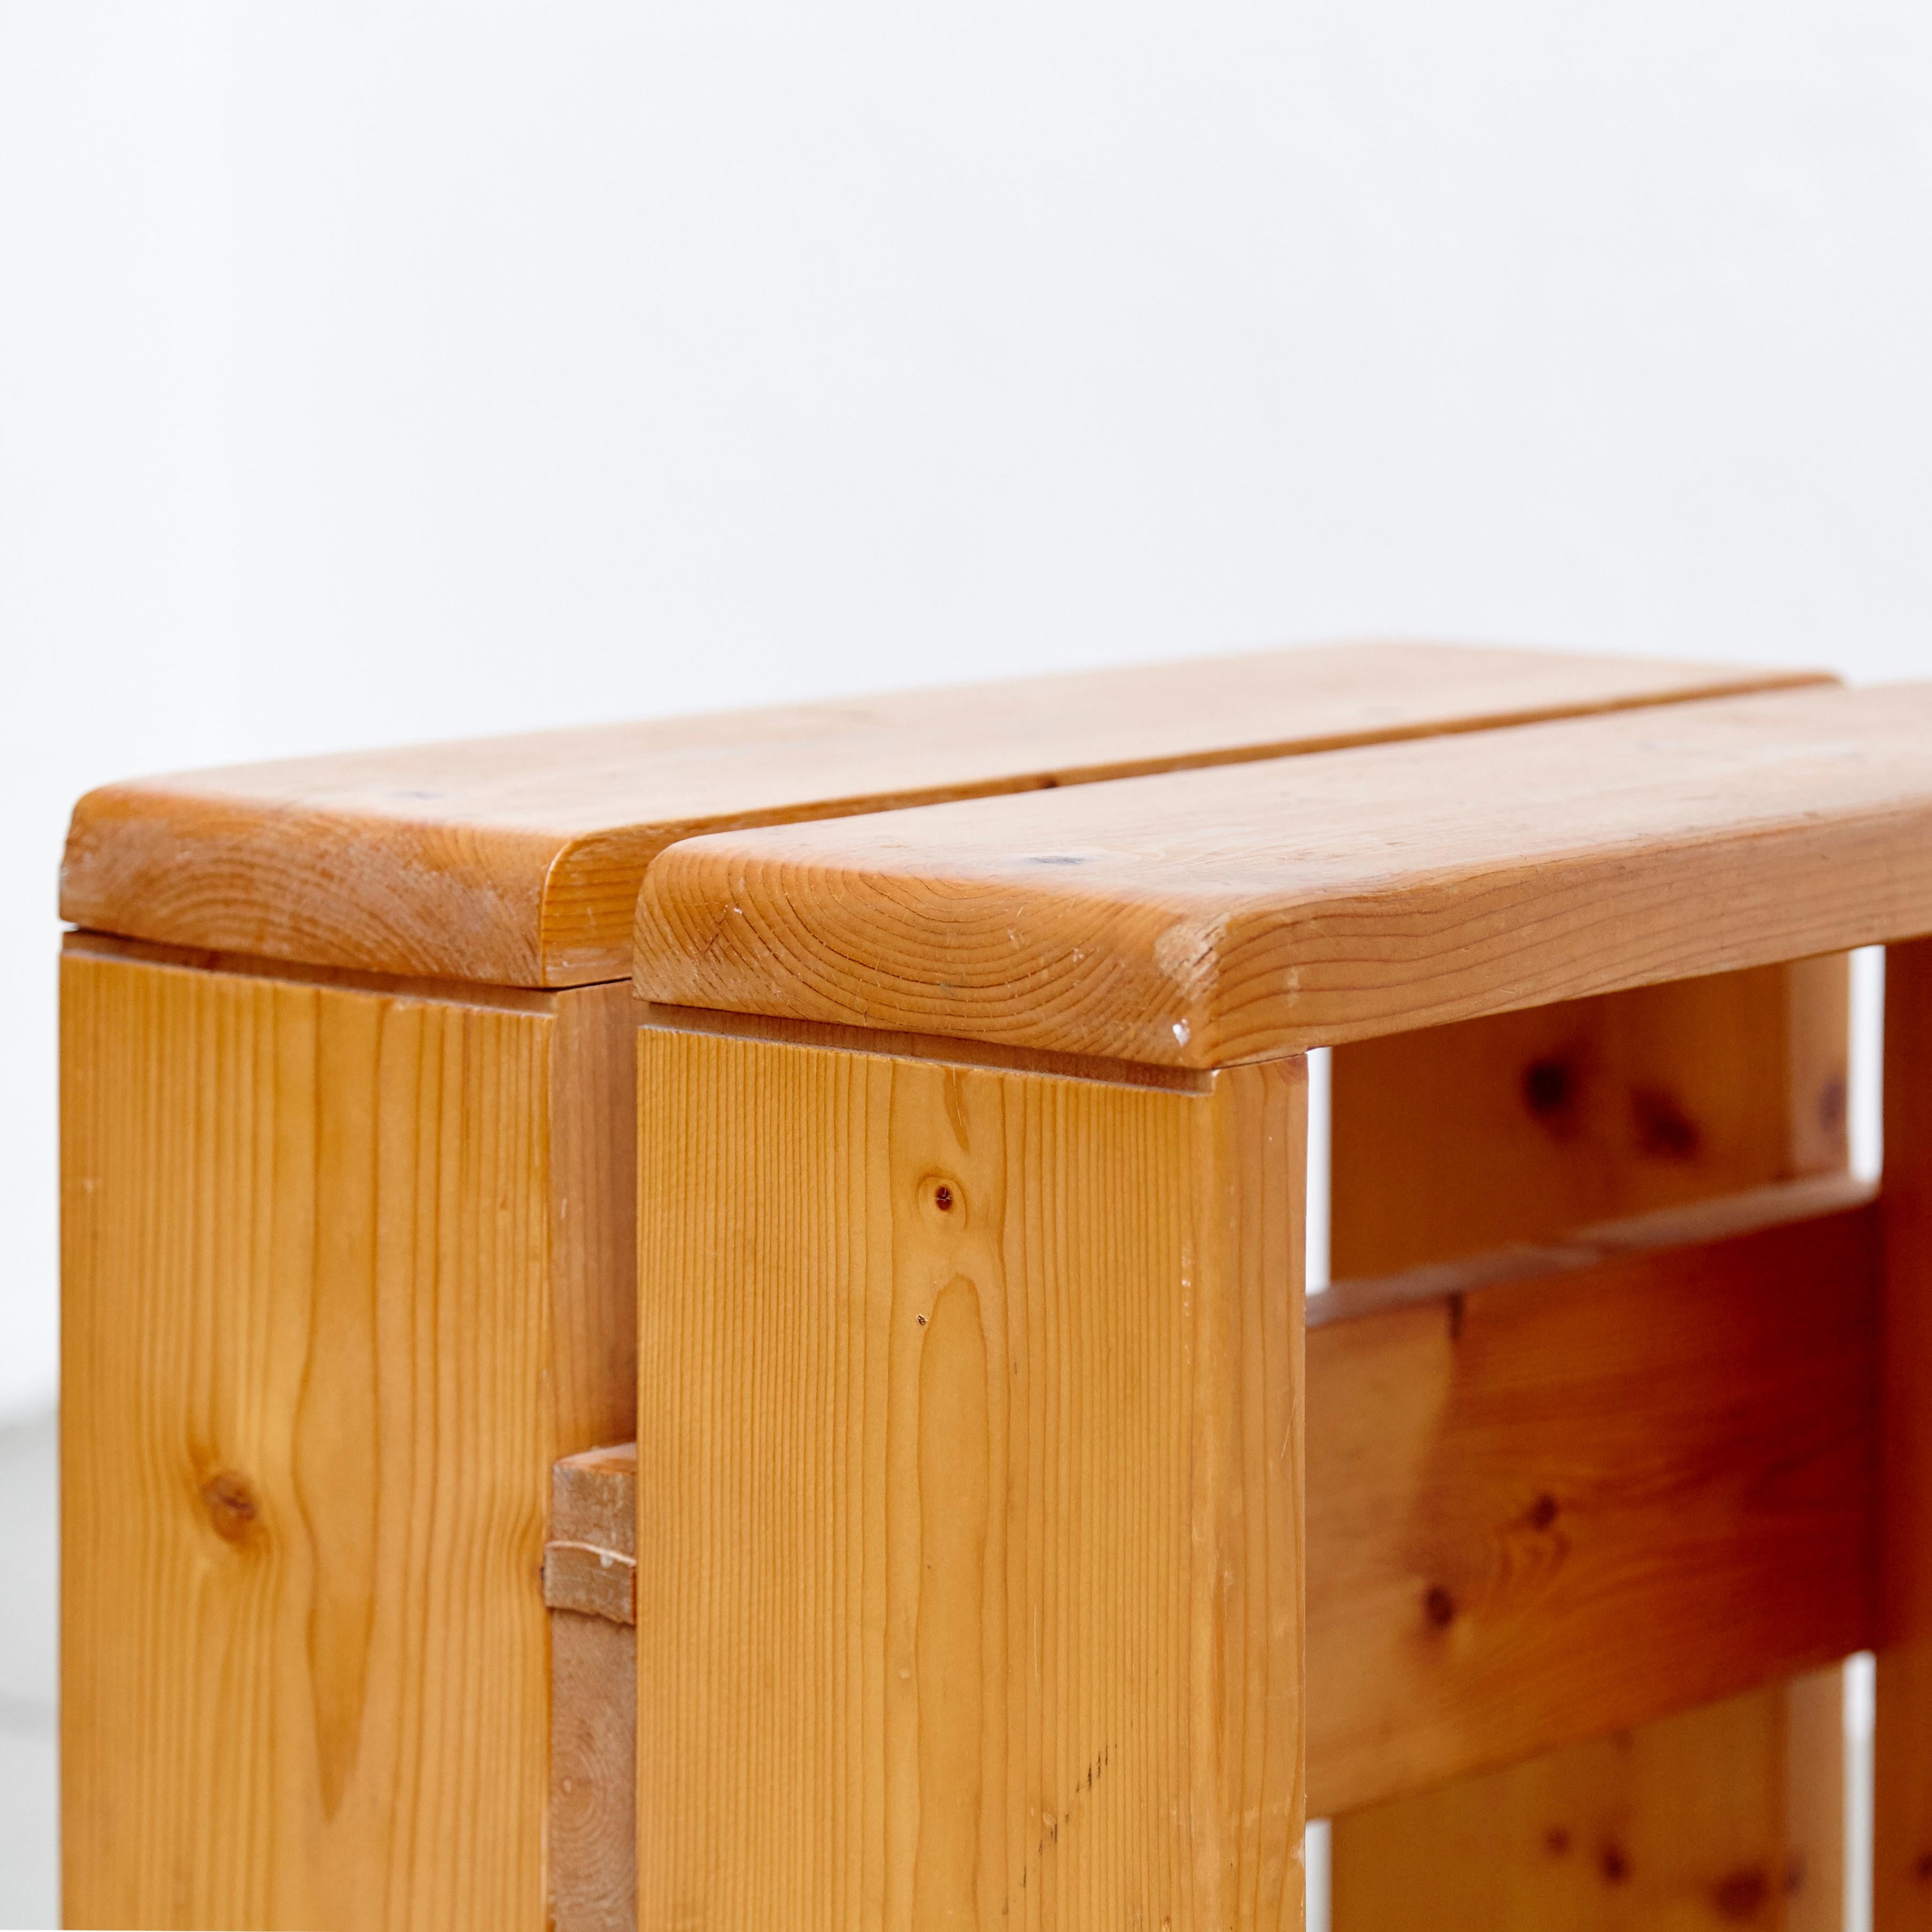 Wood Charlotte Perriand Table and Stools for Les Arcs